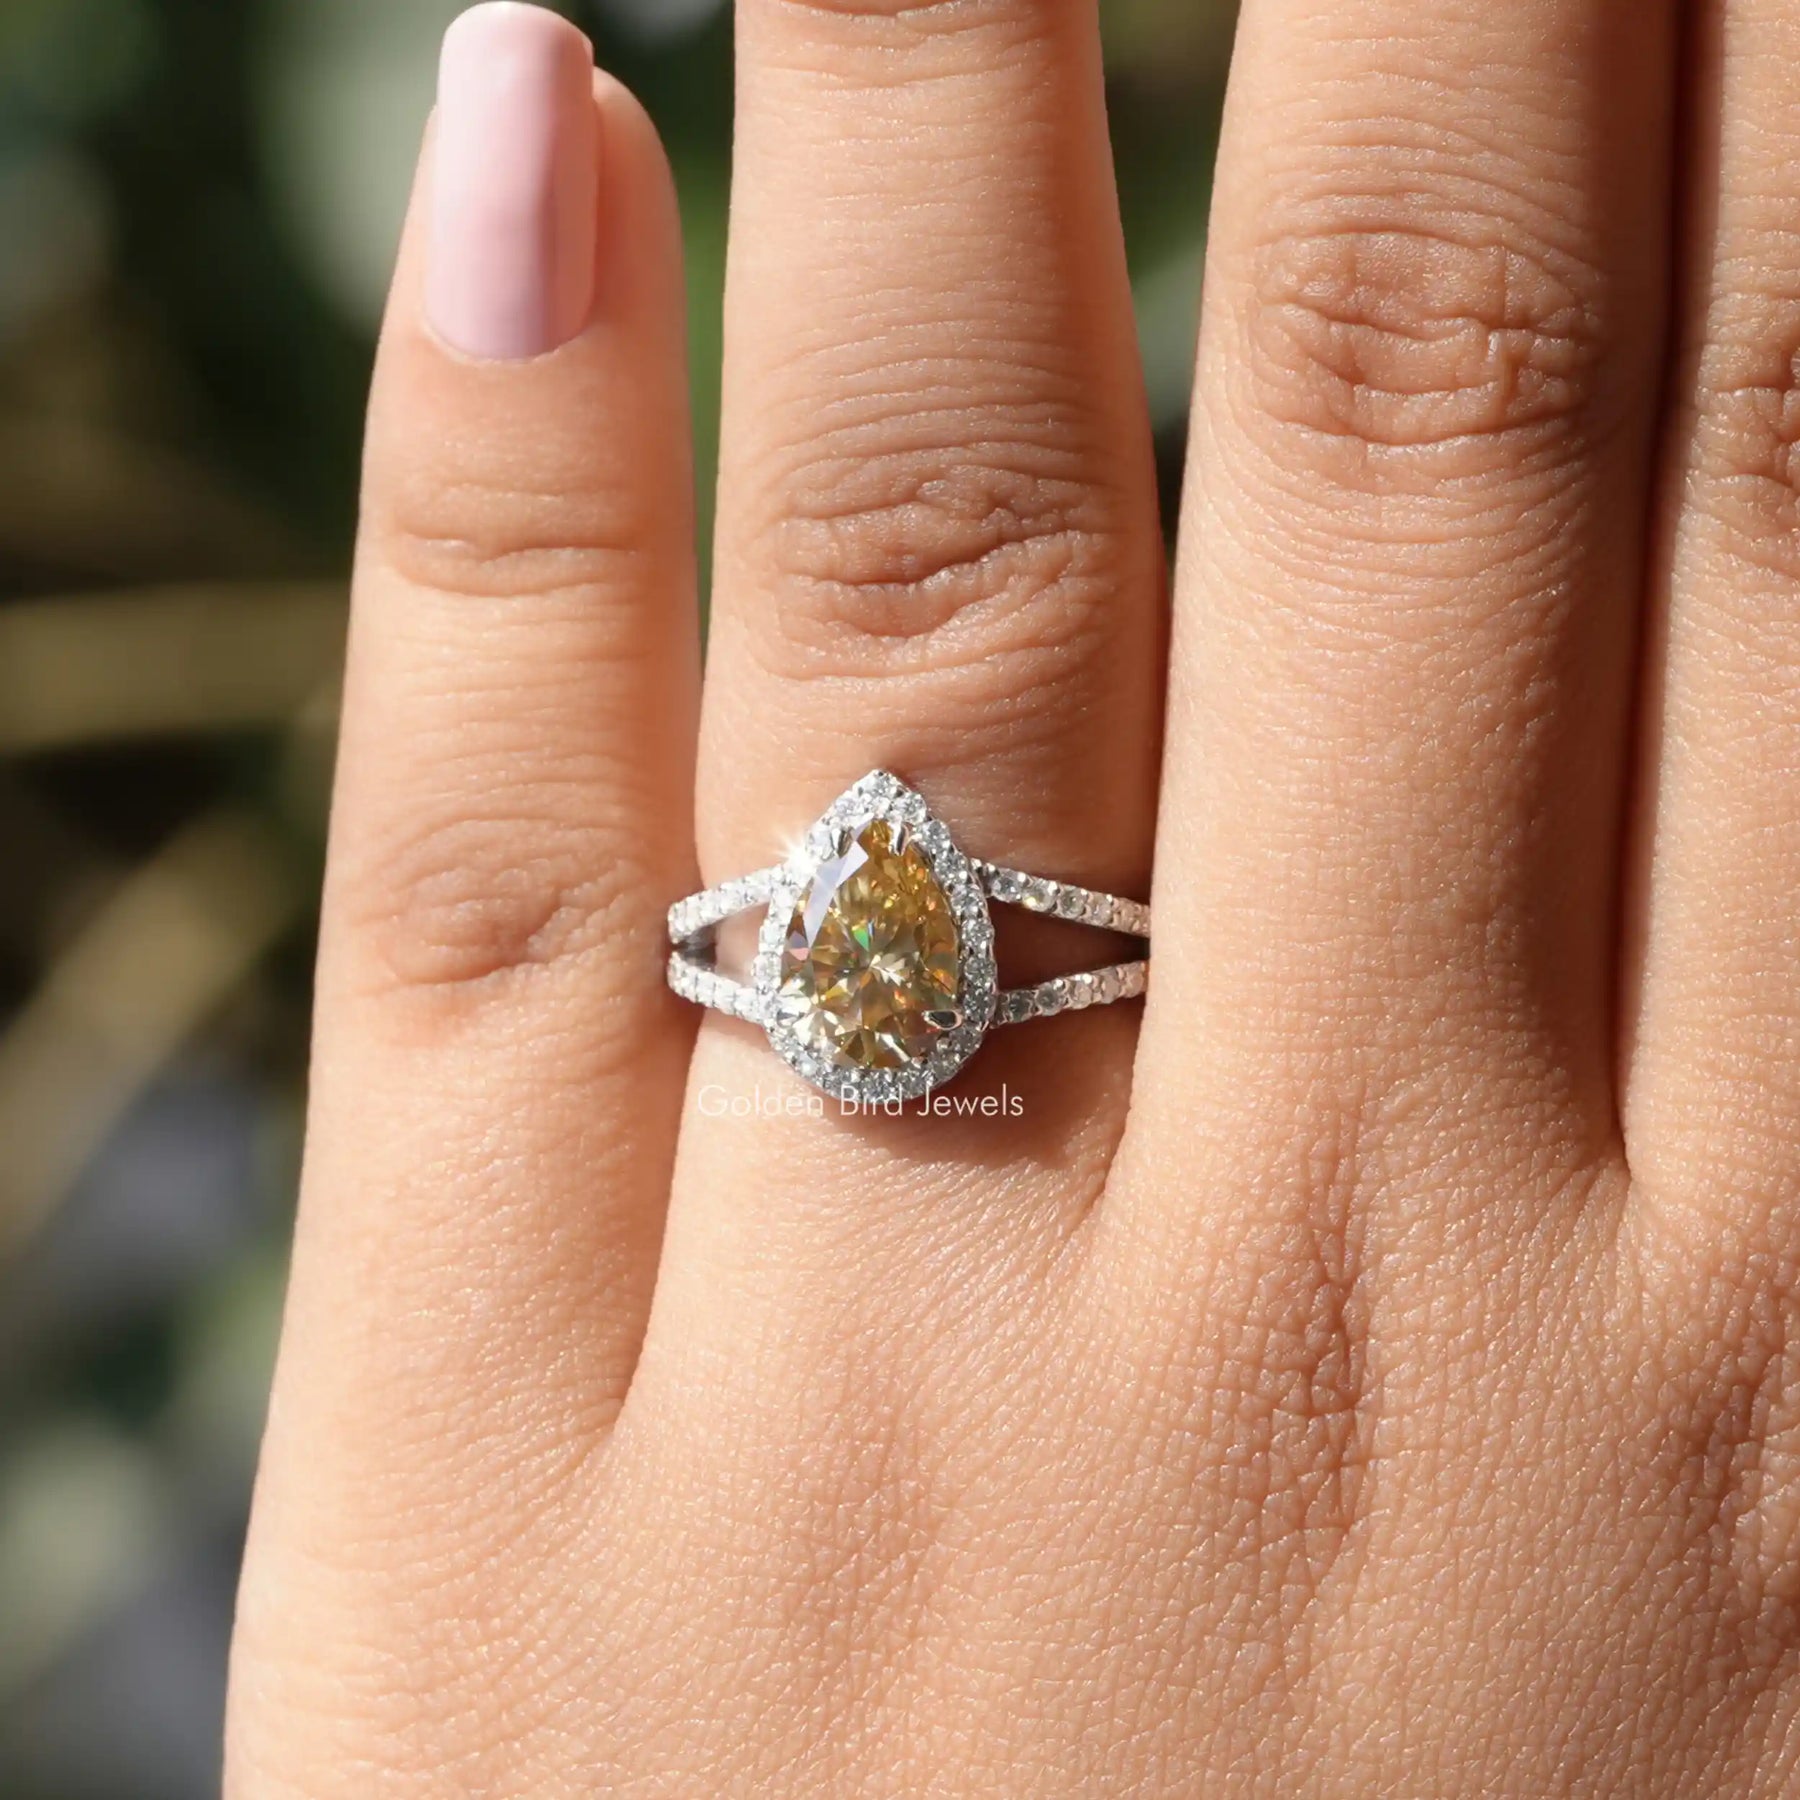 [Pear shaped moissanite ring made of prong setting]-[Golden Bird Jewels]